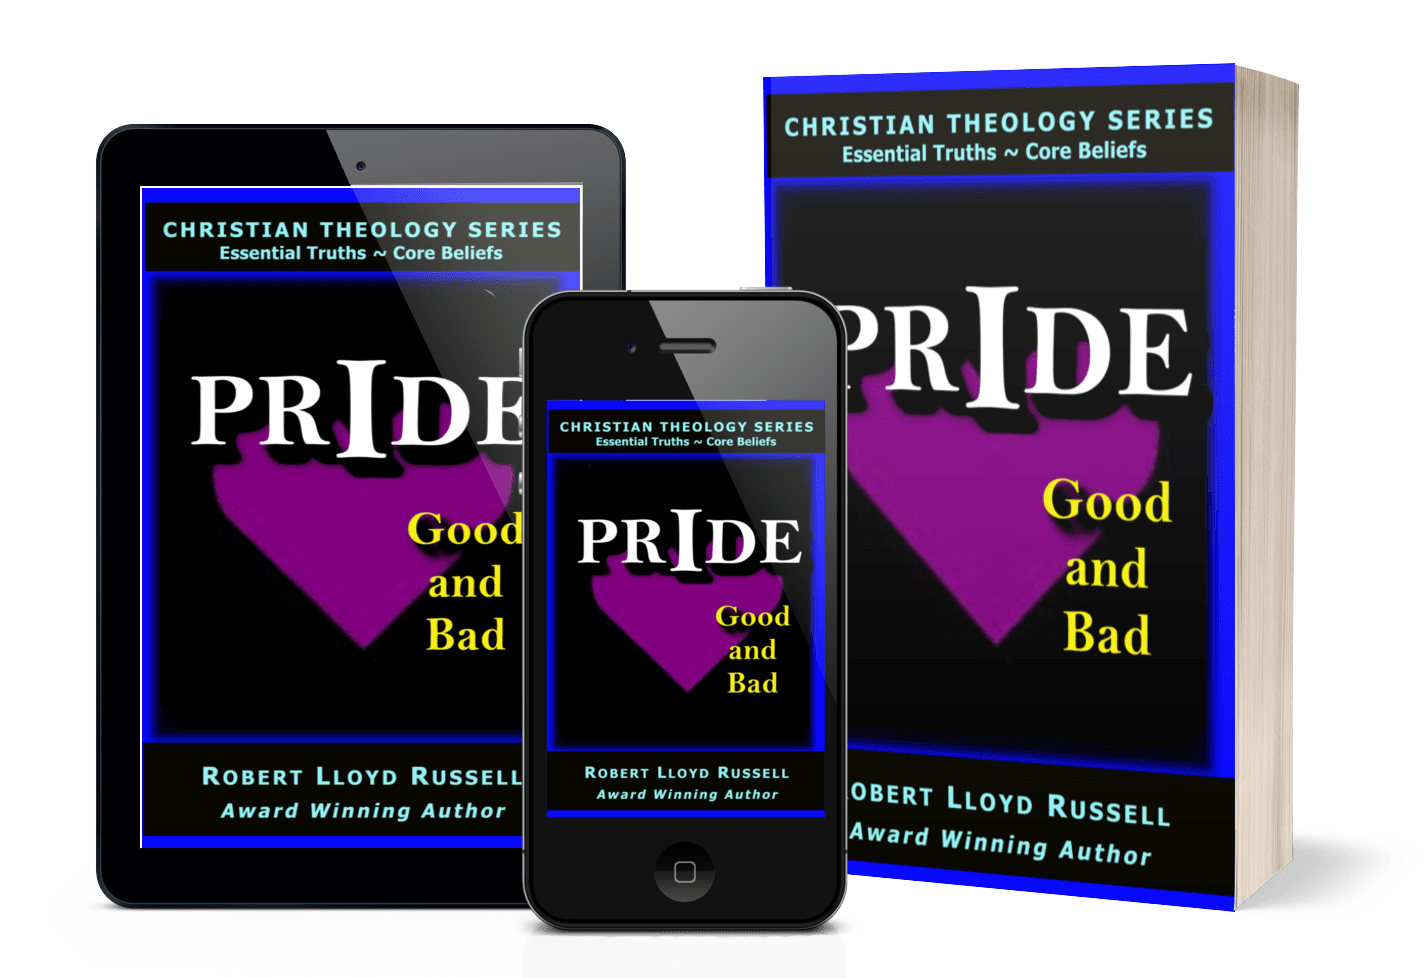 Book cover of PRIDE: Good and Bad.